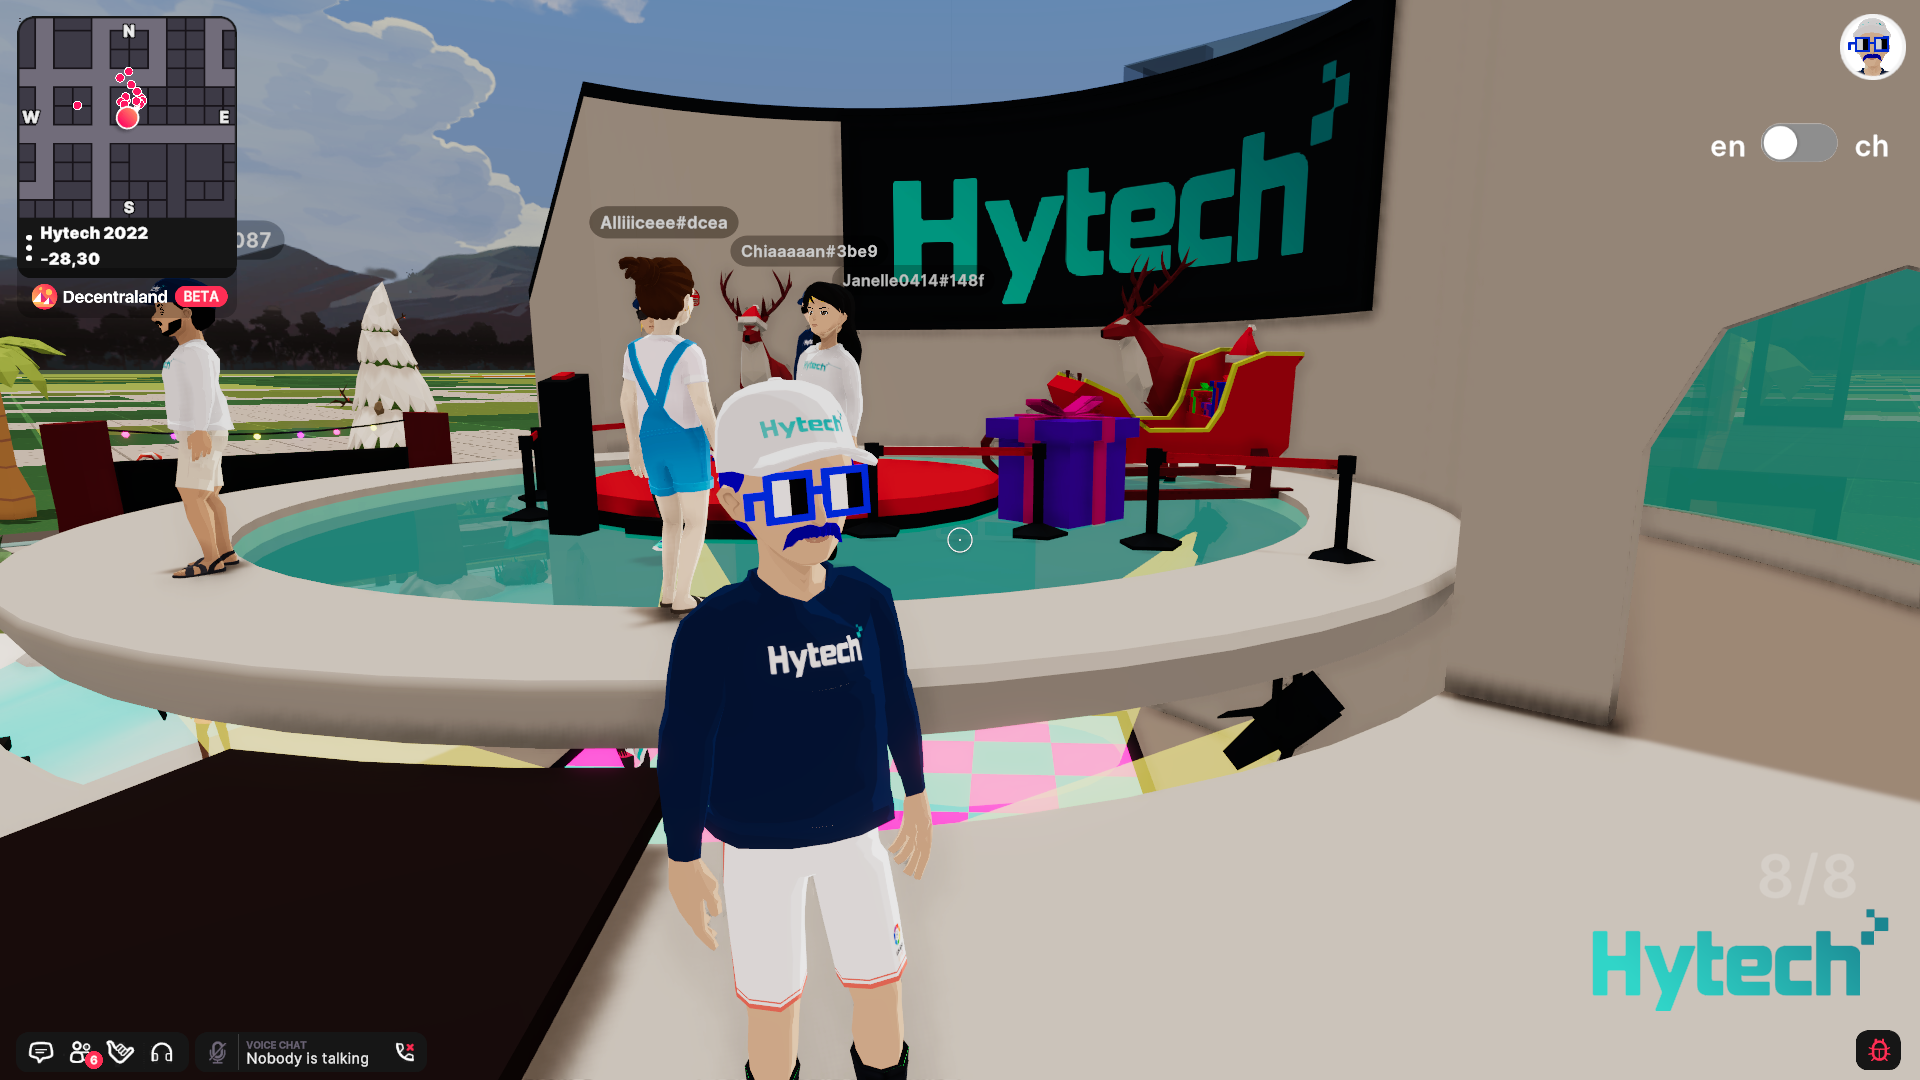 Hytech with HighCo Metaland in Decentraland 12_16_2022 1_57_55 PM